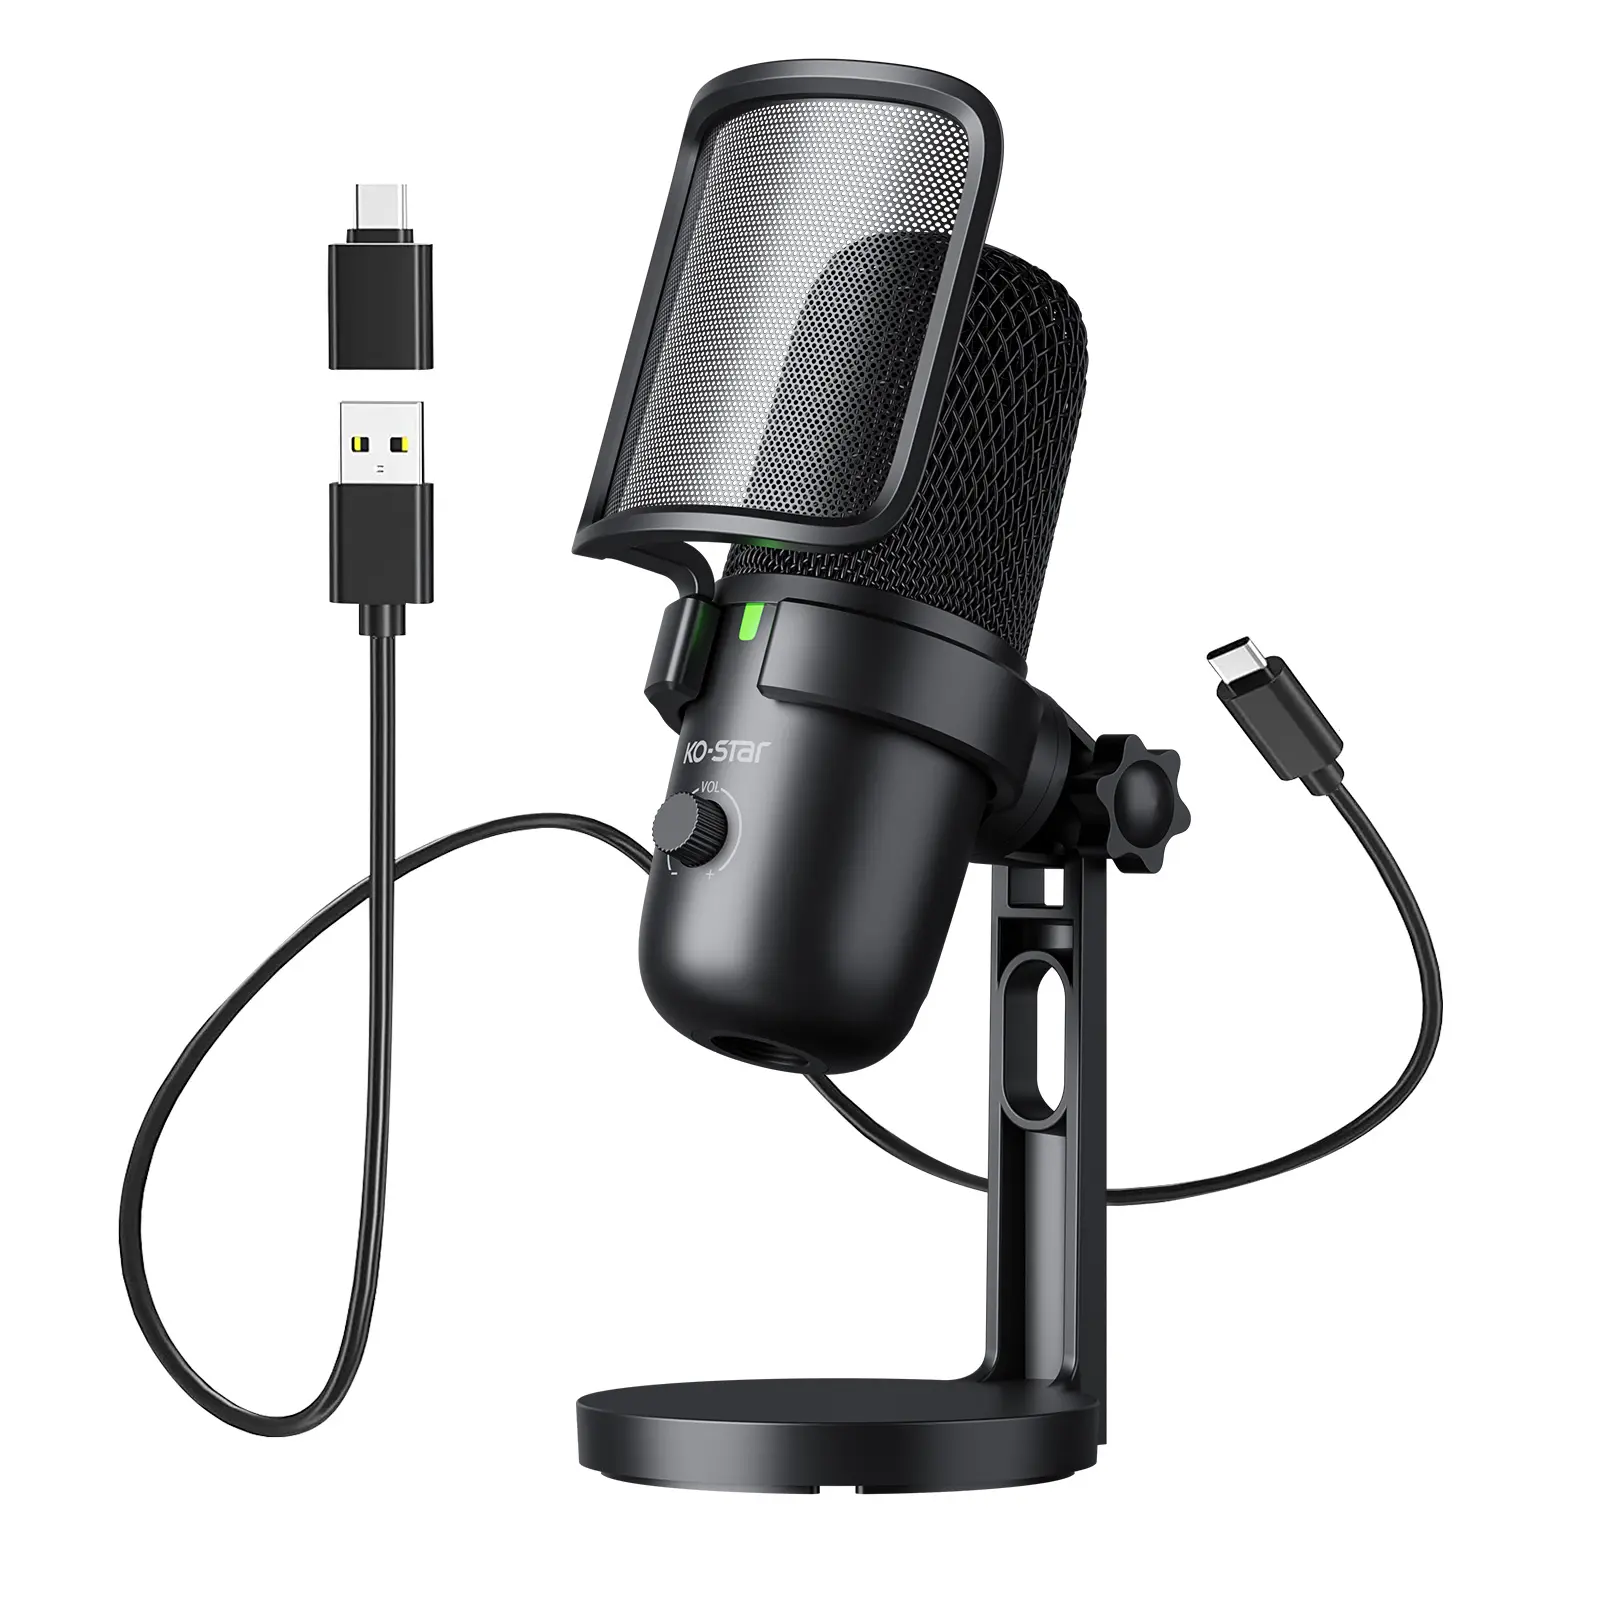 Professional Studio Recording USB Microphone Omni-Directional Condenser Interview Podcast Plug Play Microphone